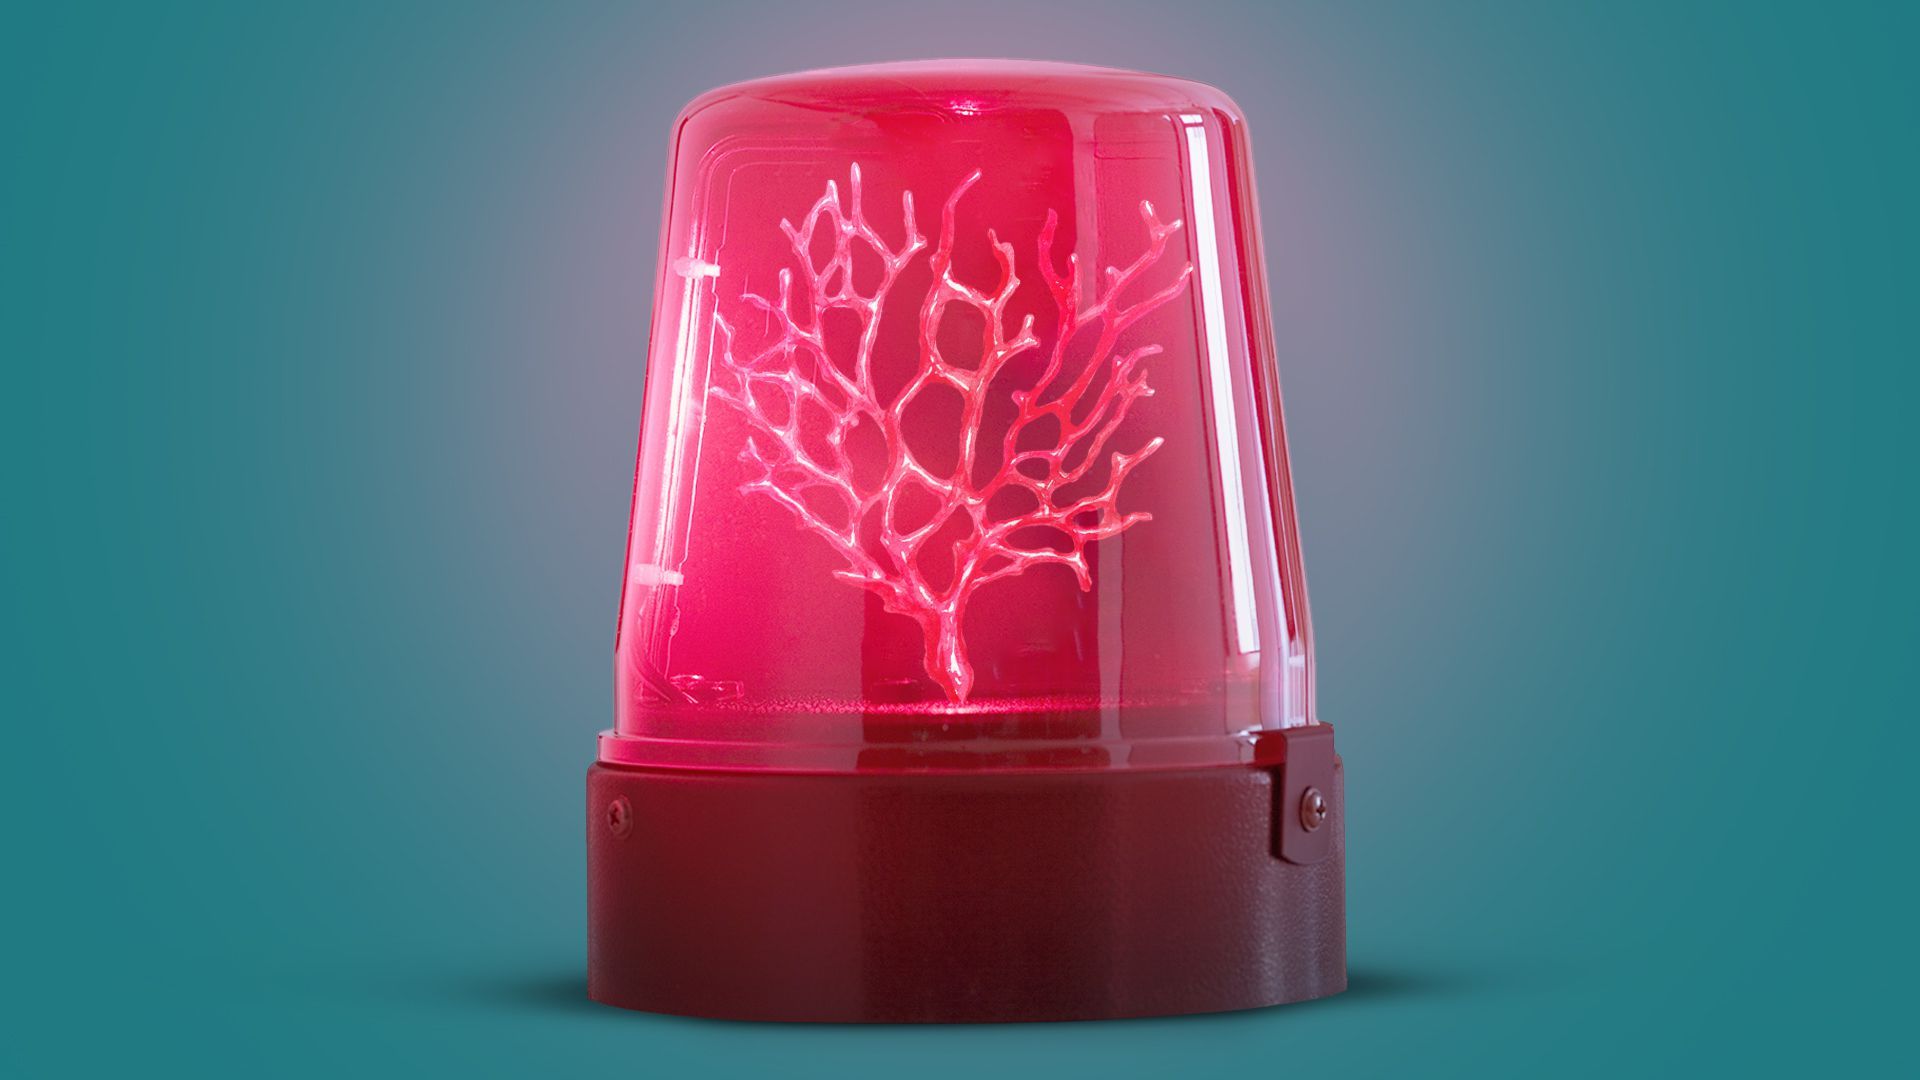 Illustration of an emergency light with coral inside